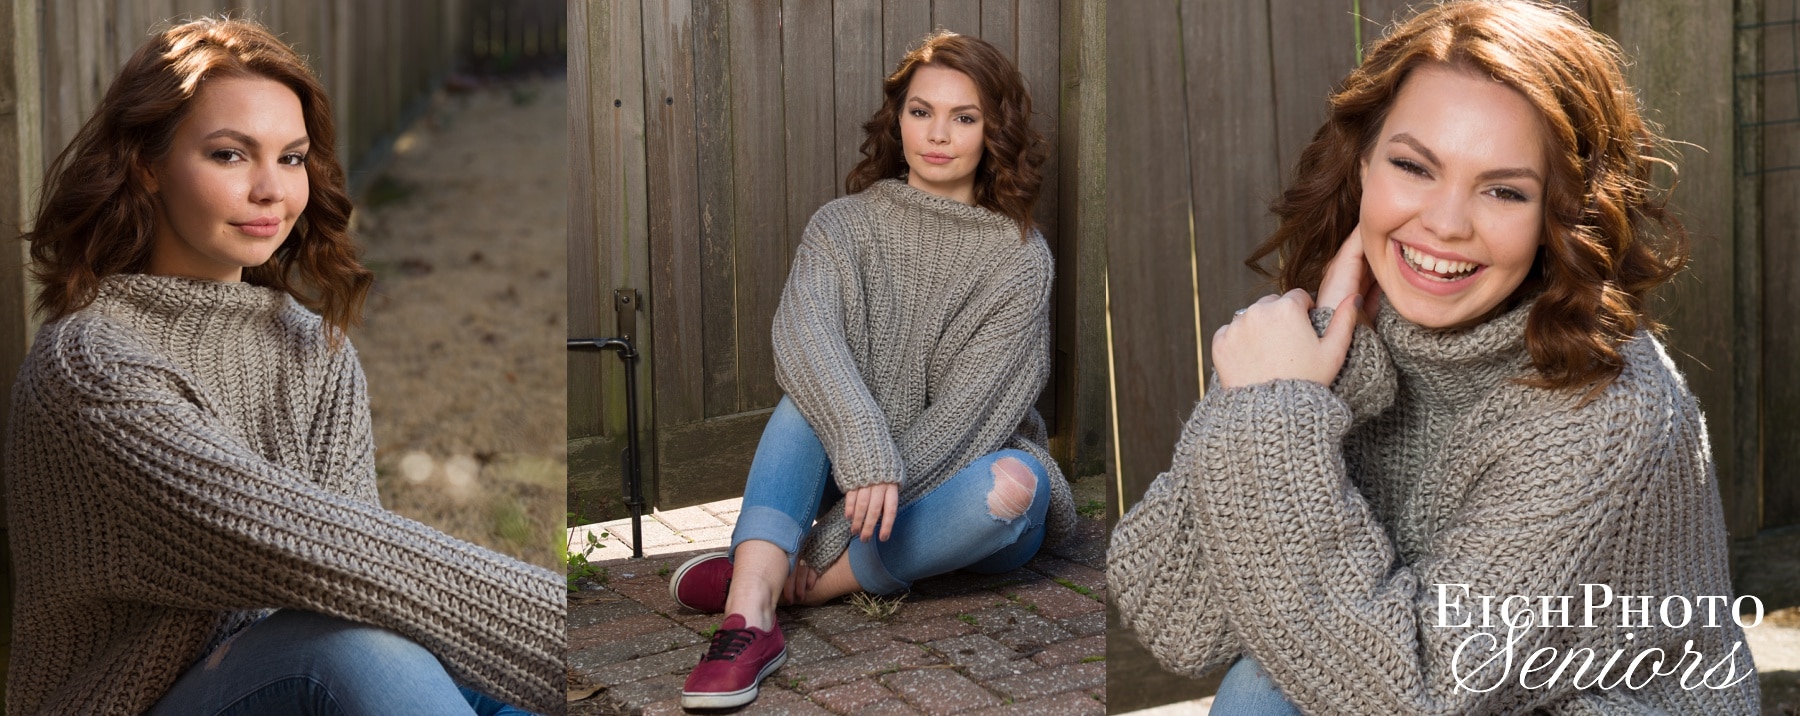 Webster Groves High School student backyard Senior Pictures. Rolled jeans, red keds, oversized textured sweater, at home, backyard, wooden fence, cobblestone walkway in garden